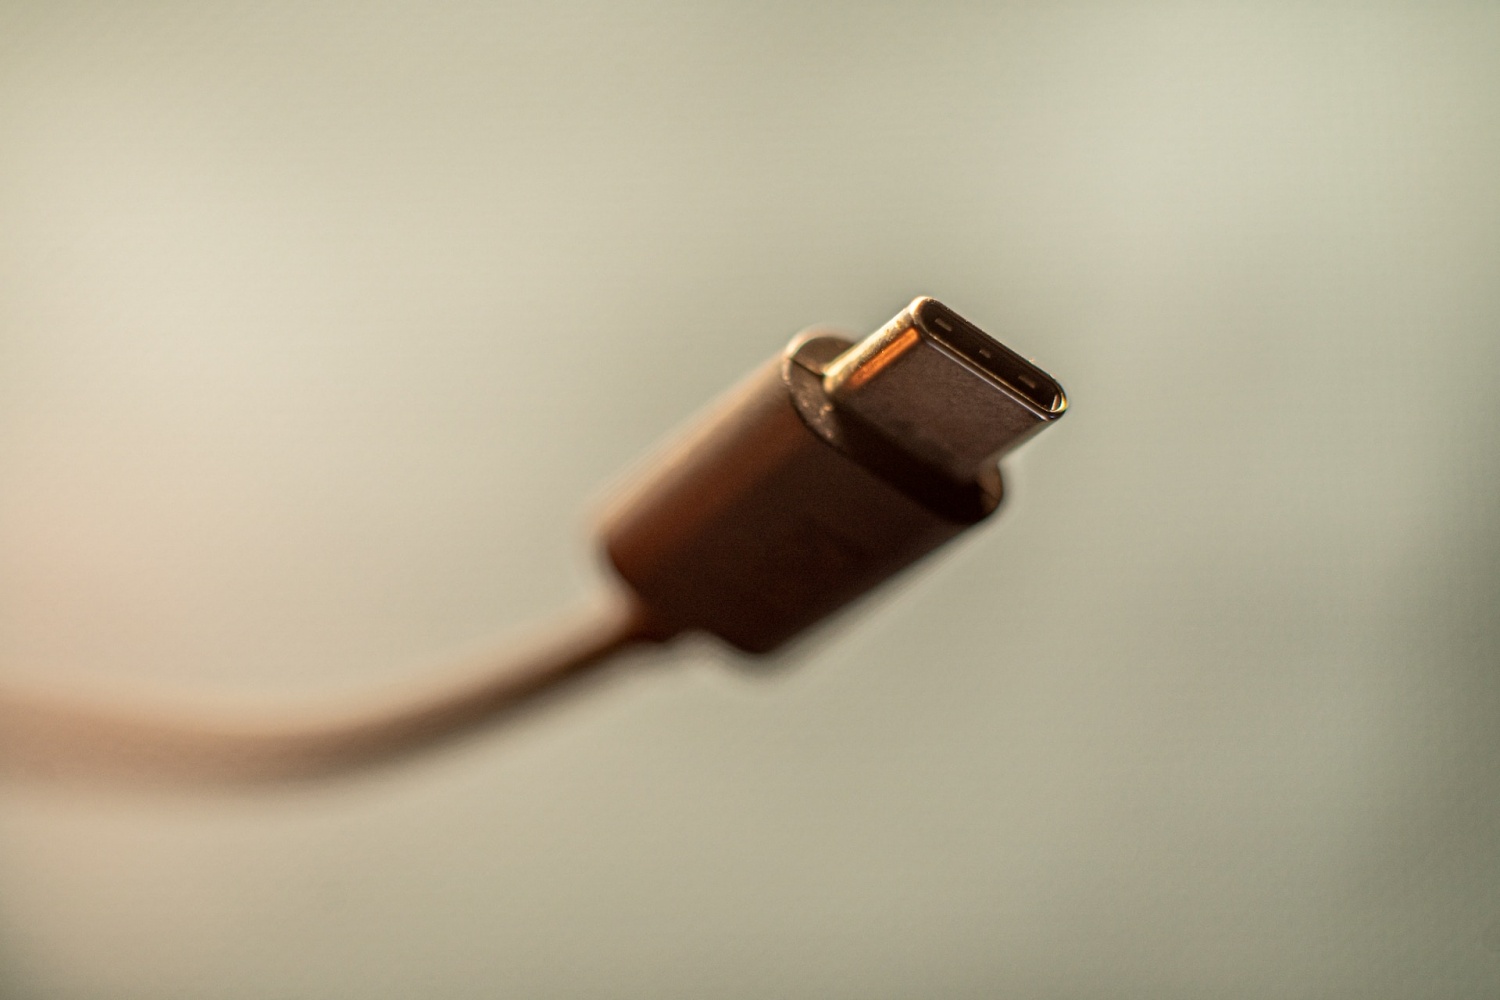 [VIRAL] Using Android USB-C Cables Will Damage Your iPhone 15 is Fake